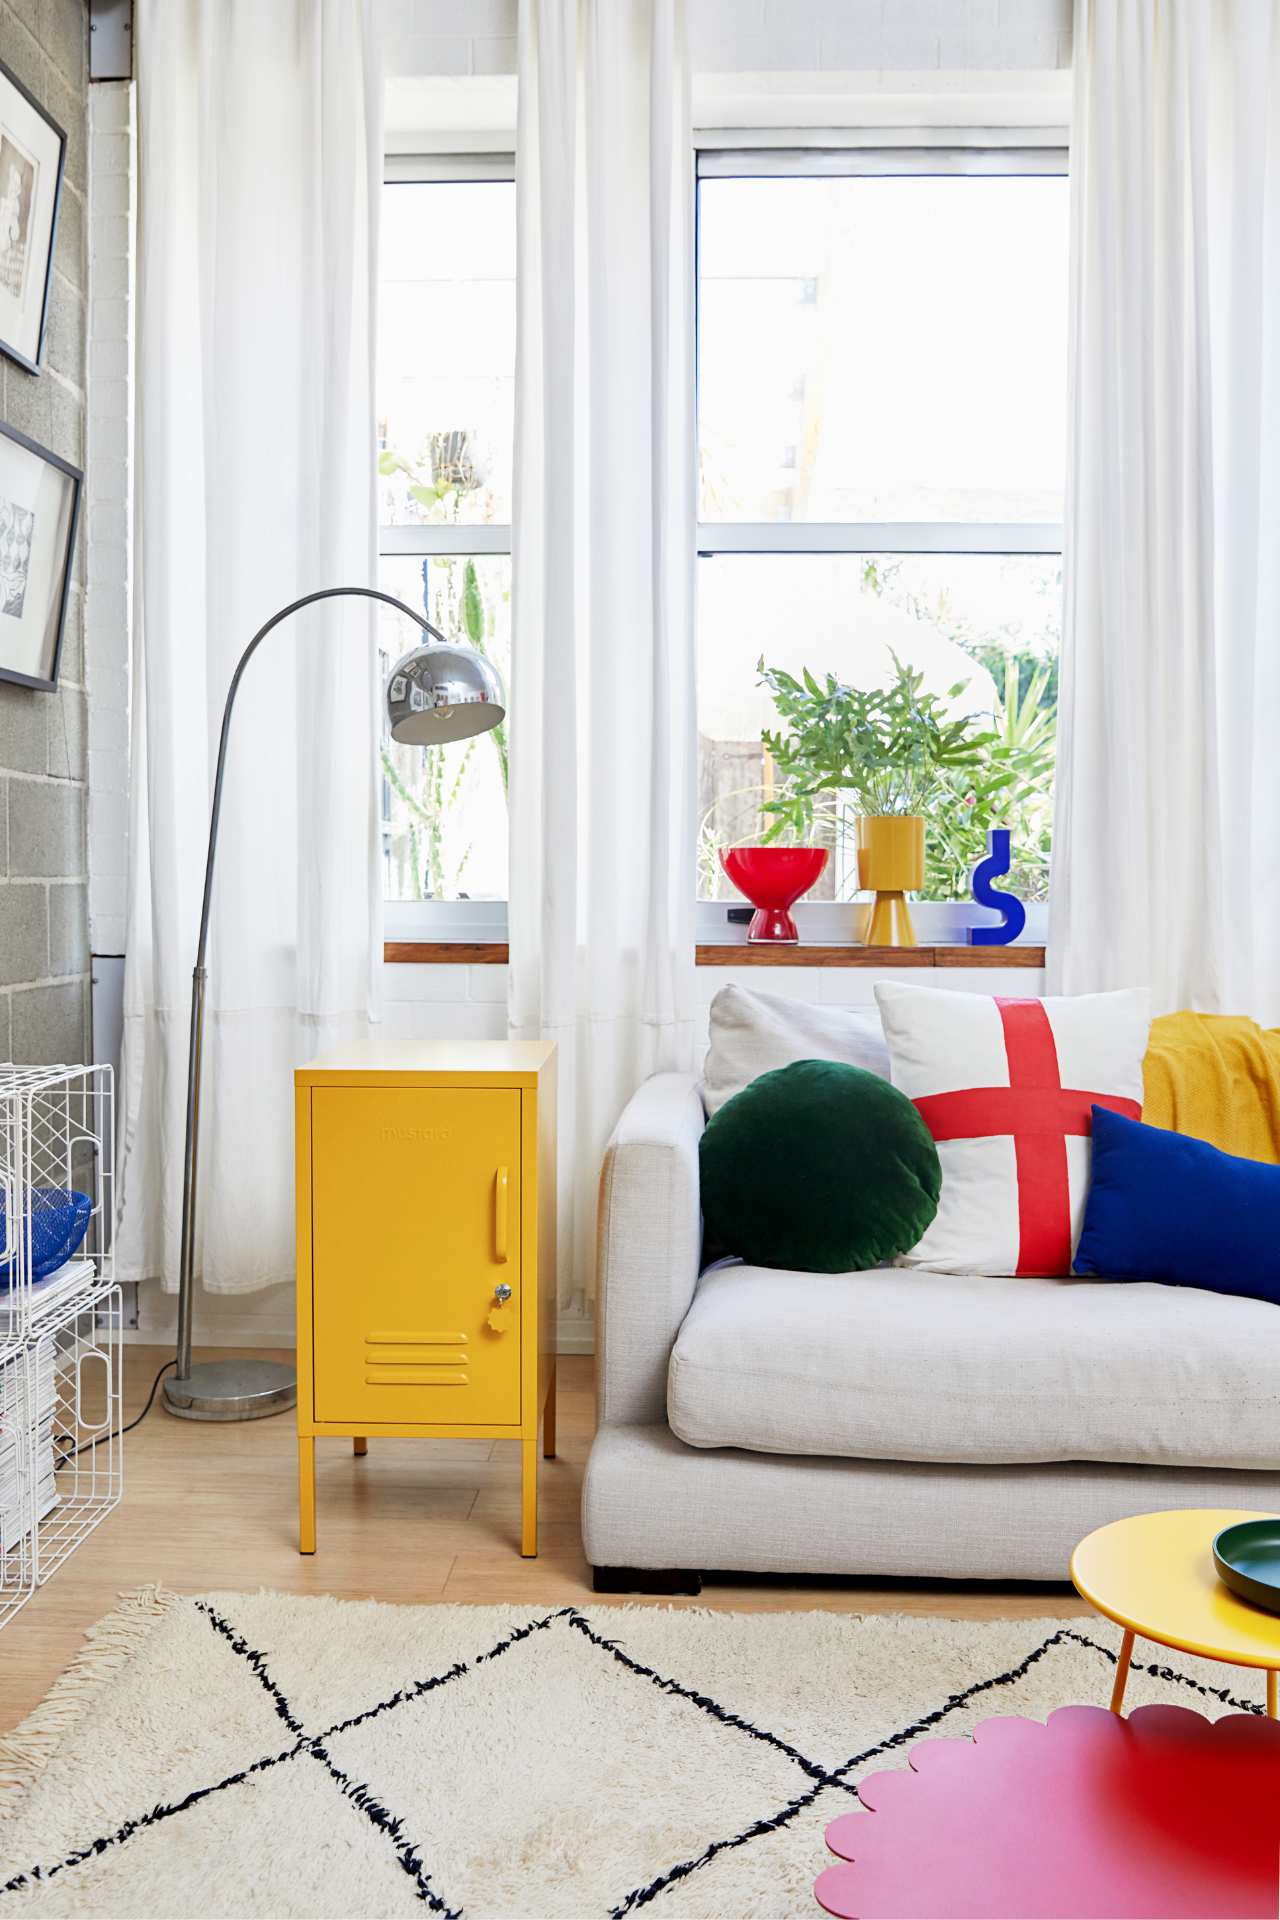 A light grey couch is scattered with cushions in primary colours and a silver floor lamp curves over a mustard yellow locker. Through the window is a view of trailing greenery.